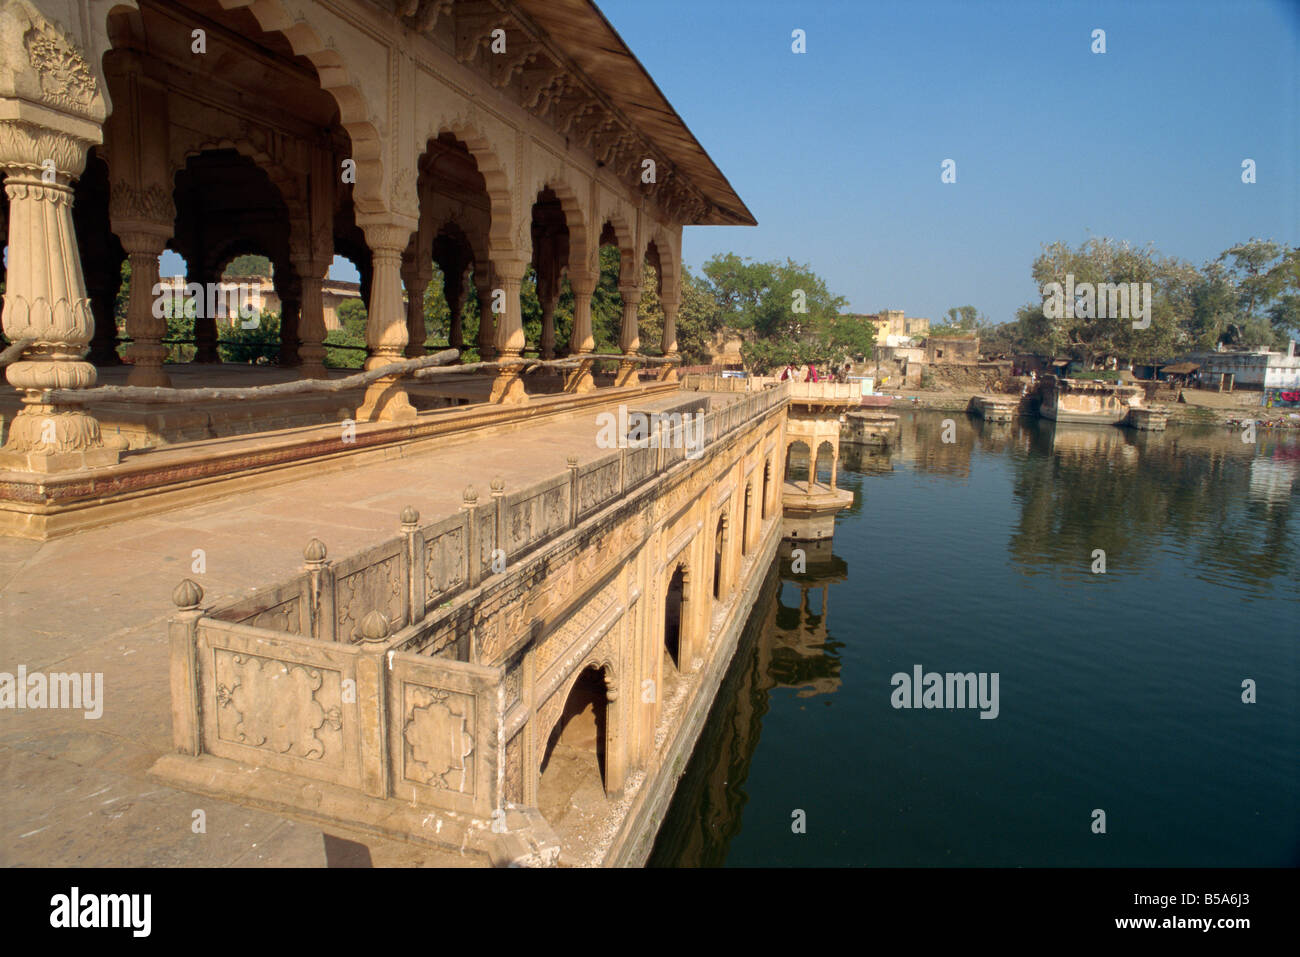 Summer Palace built in 1768 with over 2000 fountains Deeg Rajasthan state India Asia Stock Photo